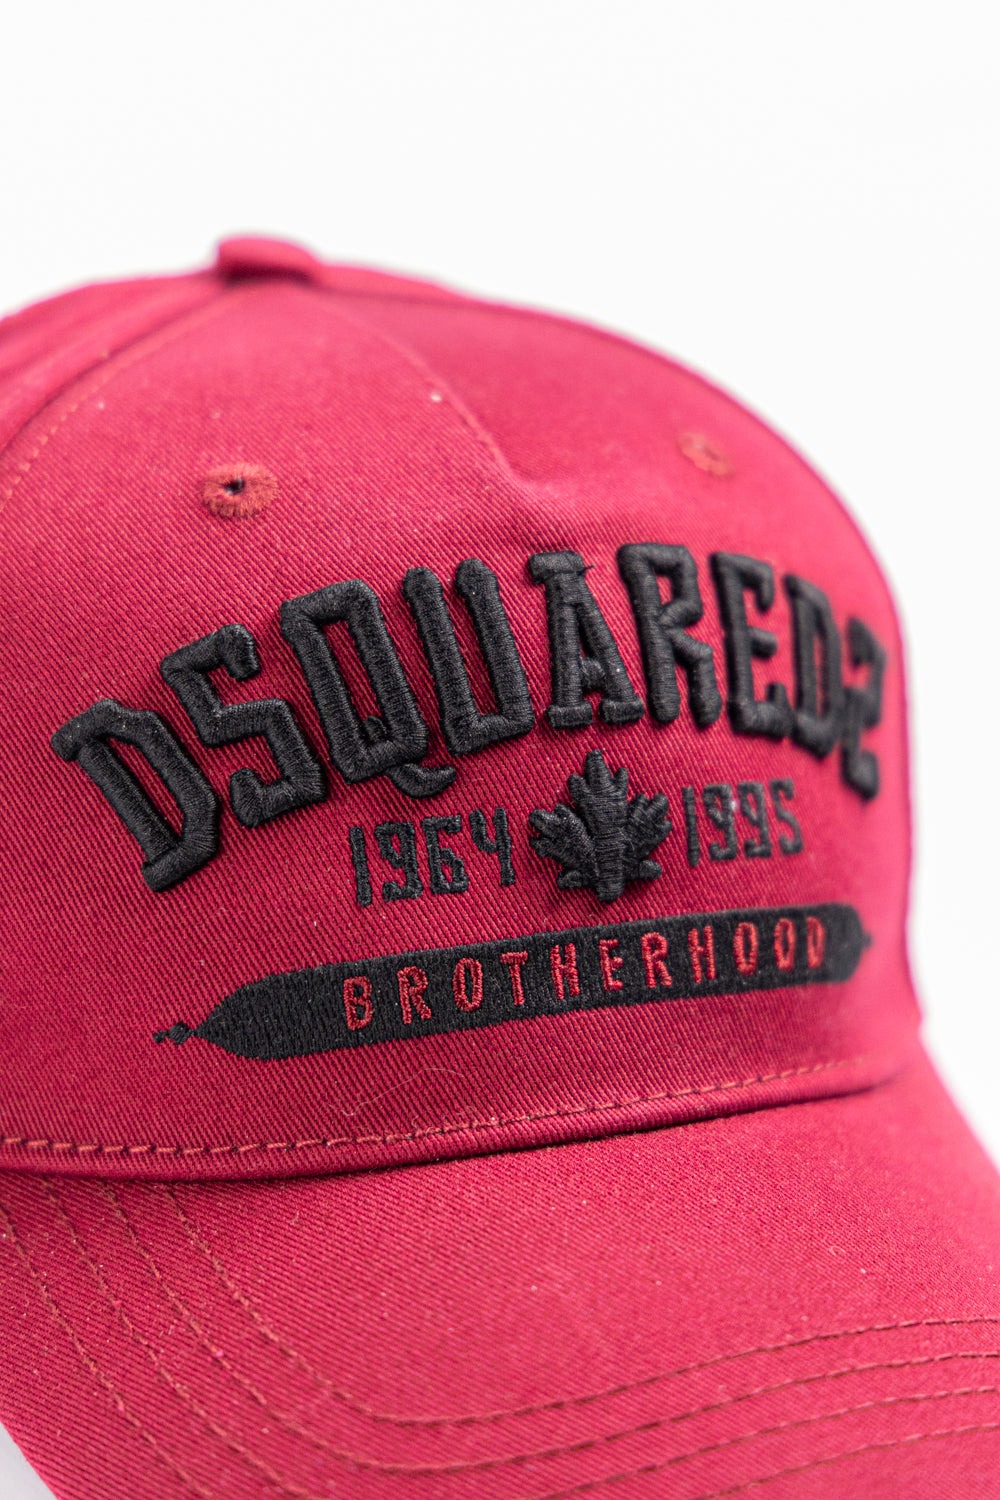 Dsquared2 Baseball Cap - Brands Off - Buy Online Luxury Clothing - Fashion Online Shop - Outlet Price